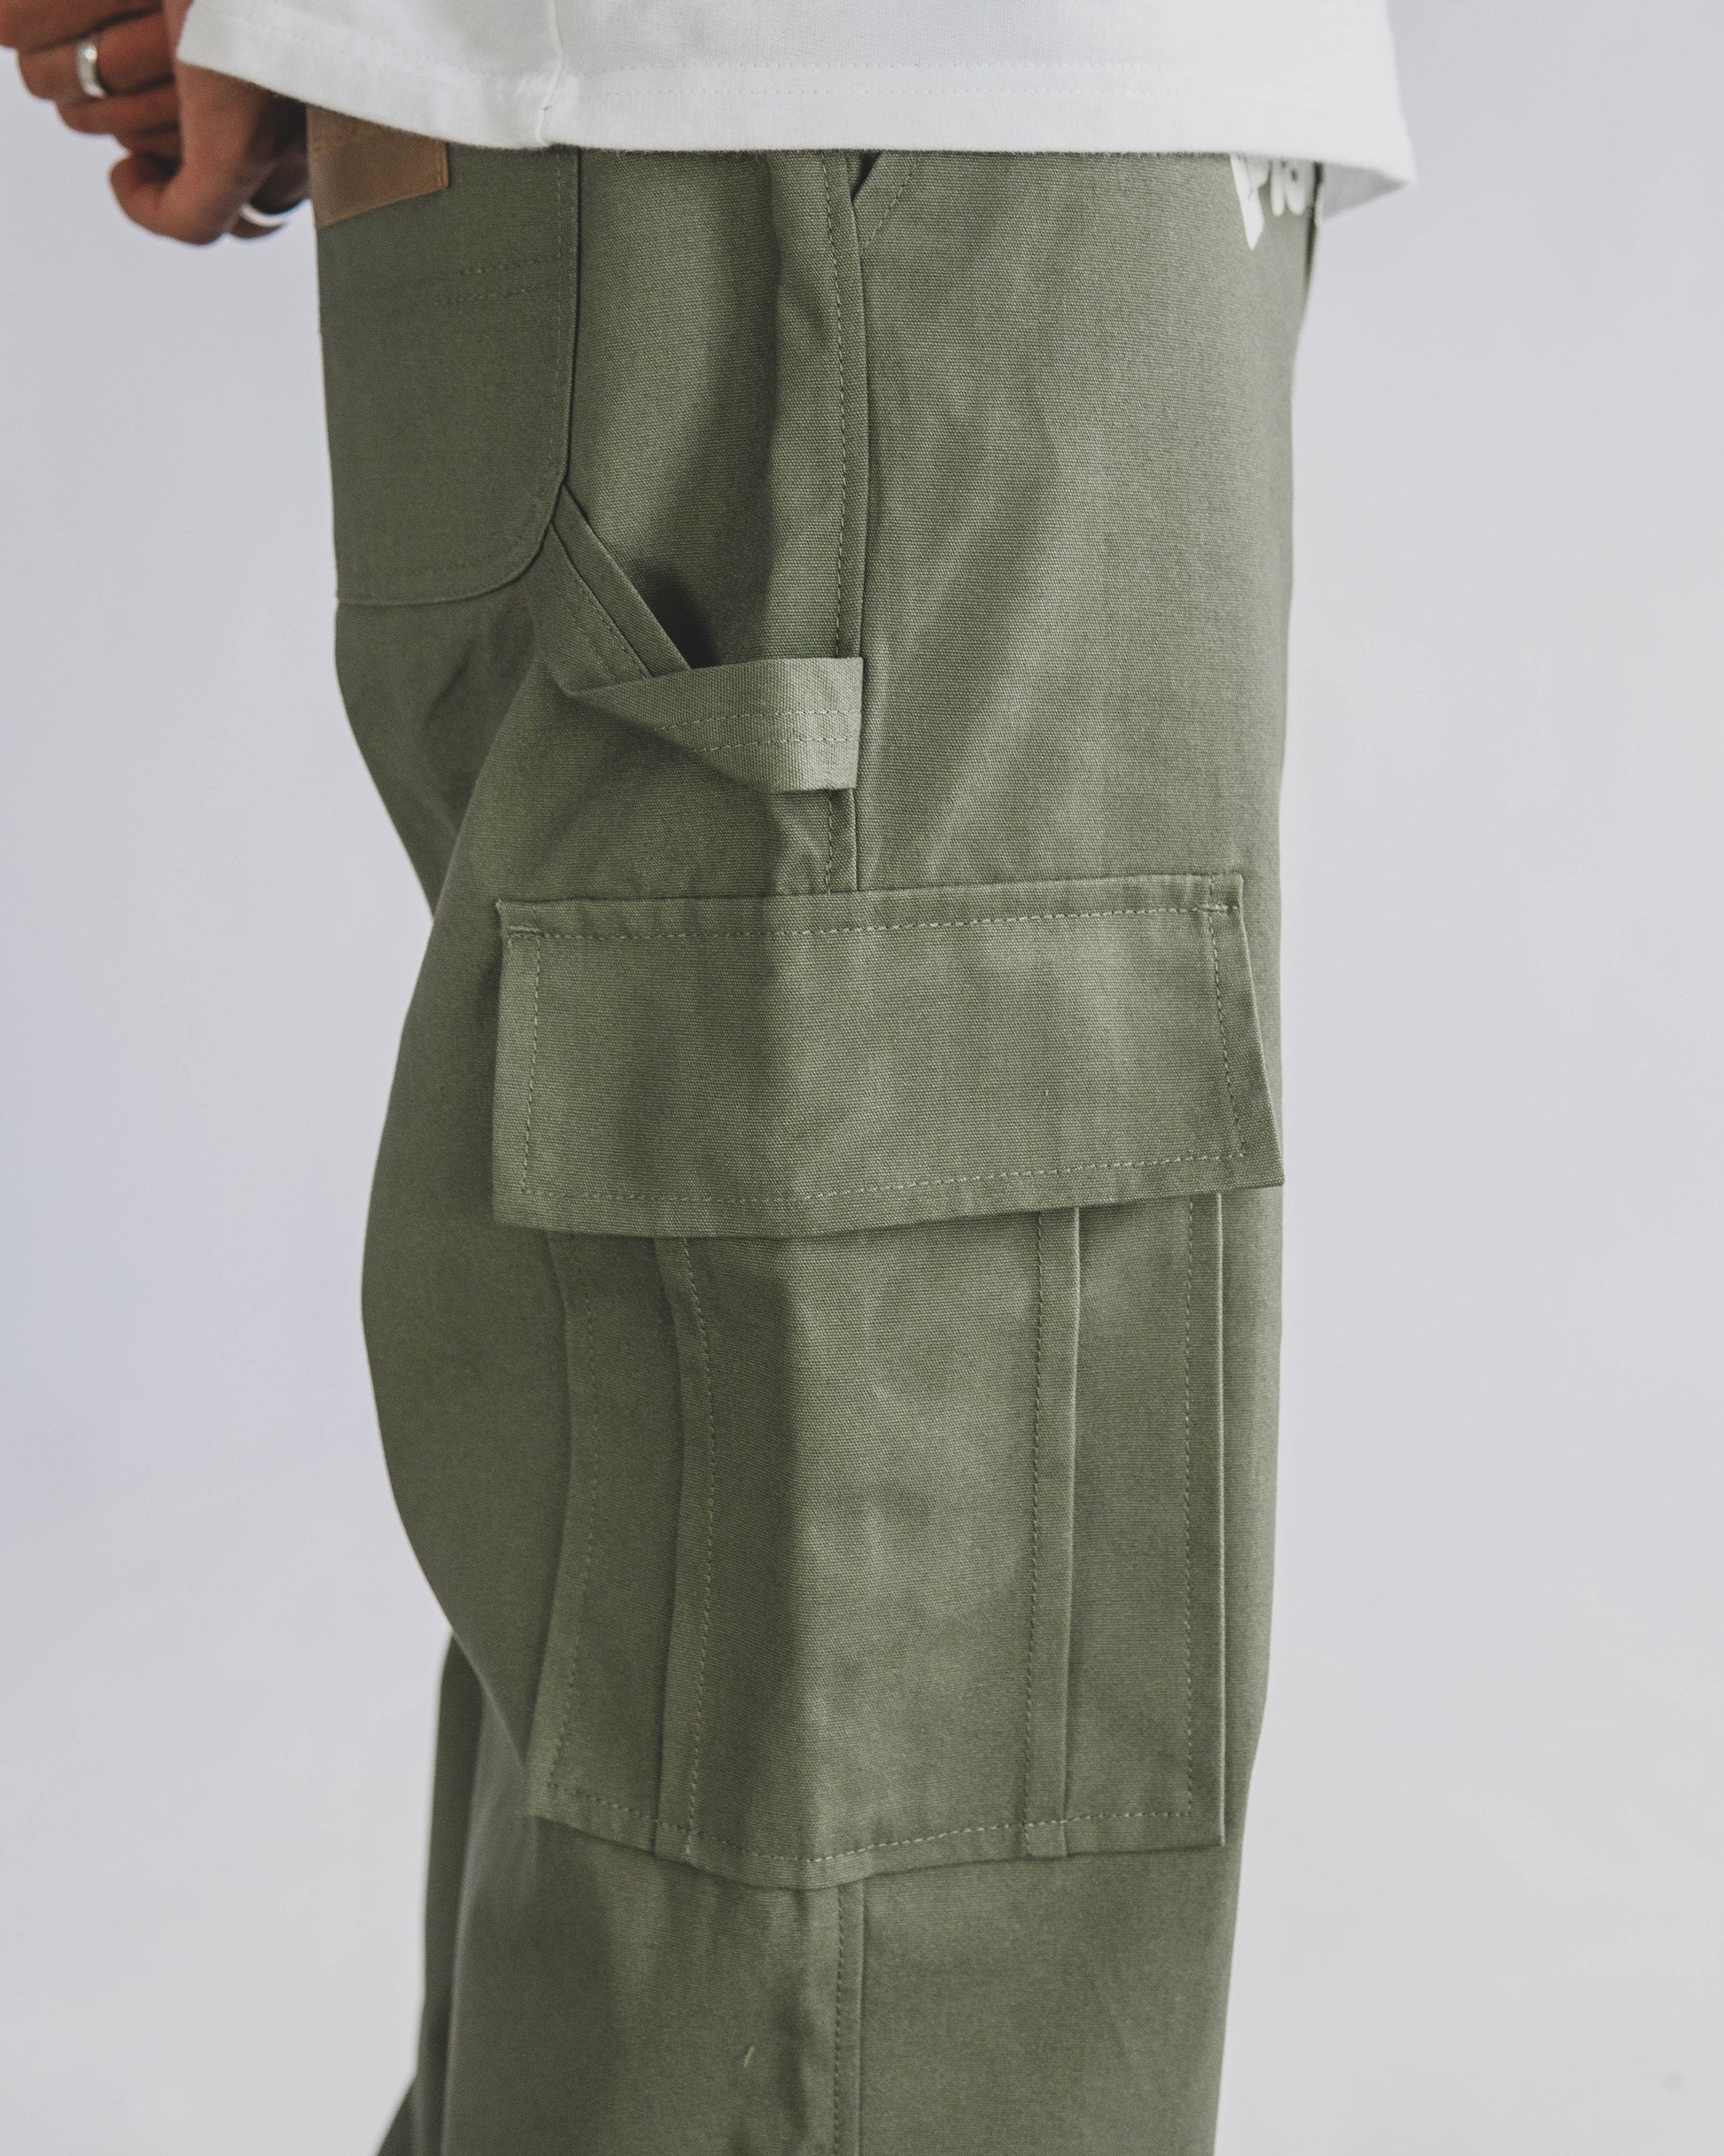 Episodes Olive Cargo Pant - The Episodes Project